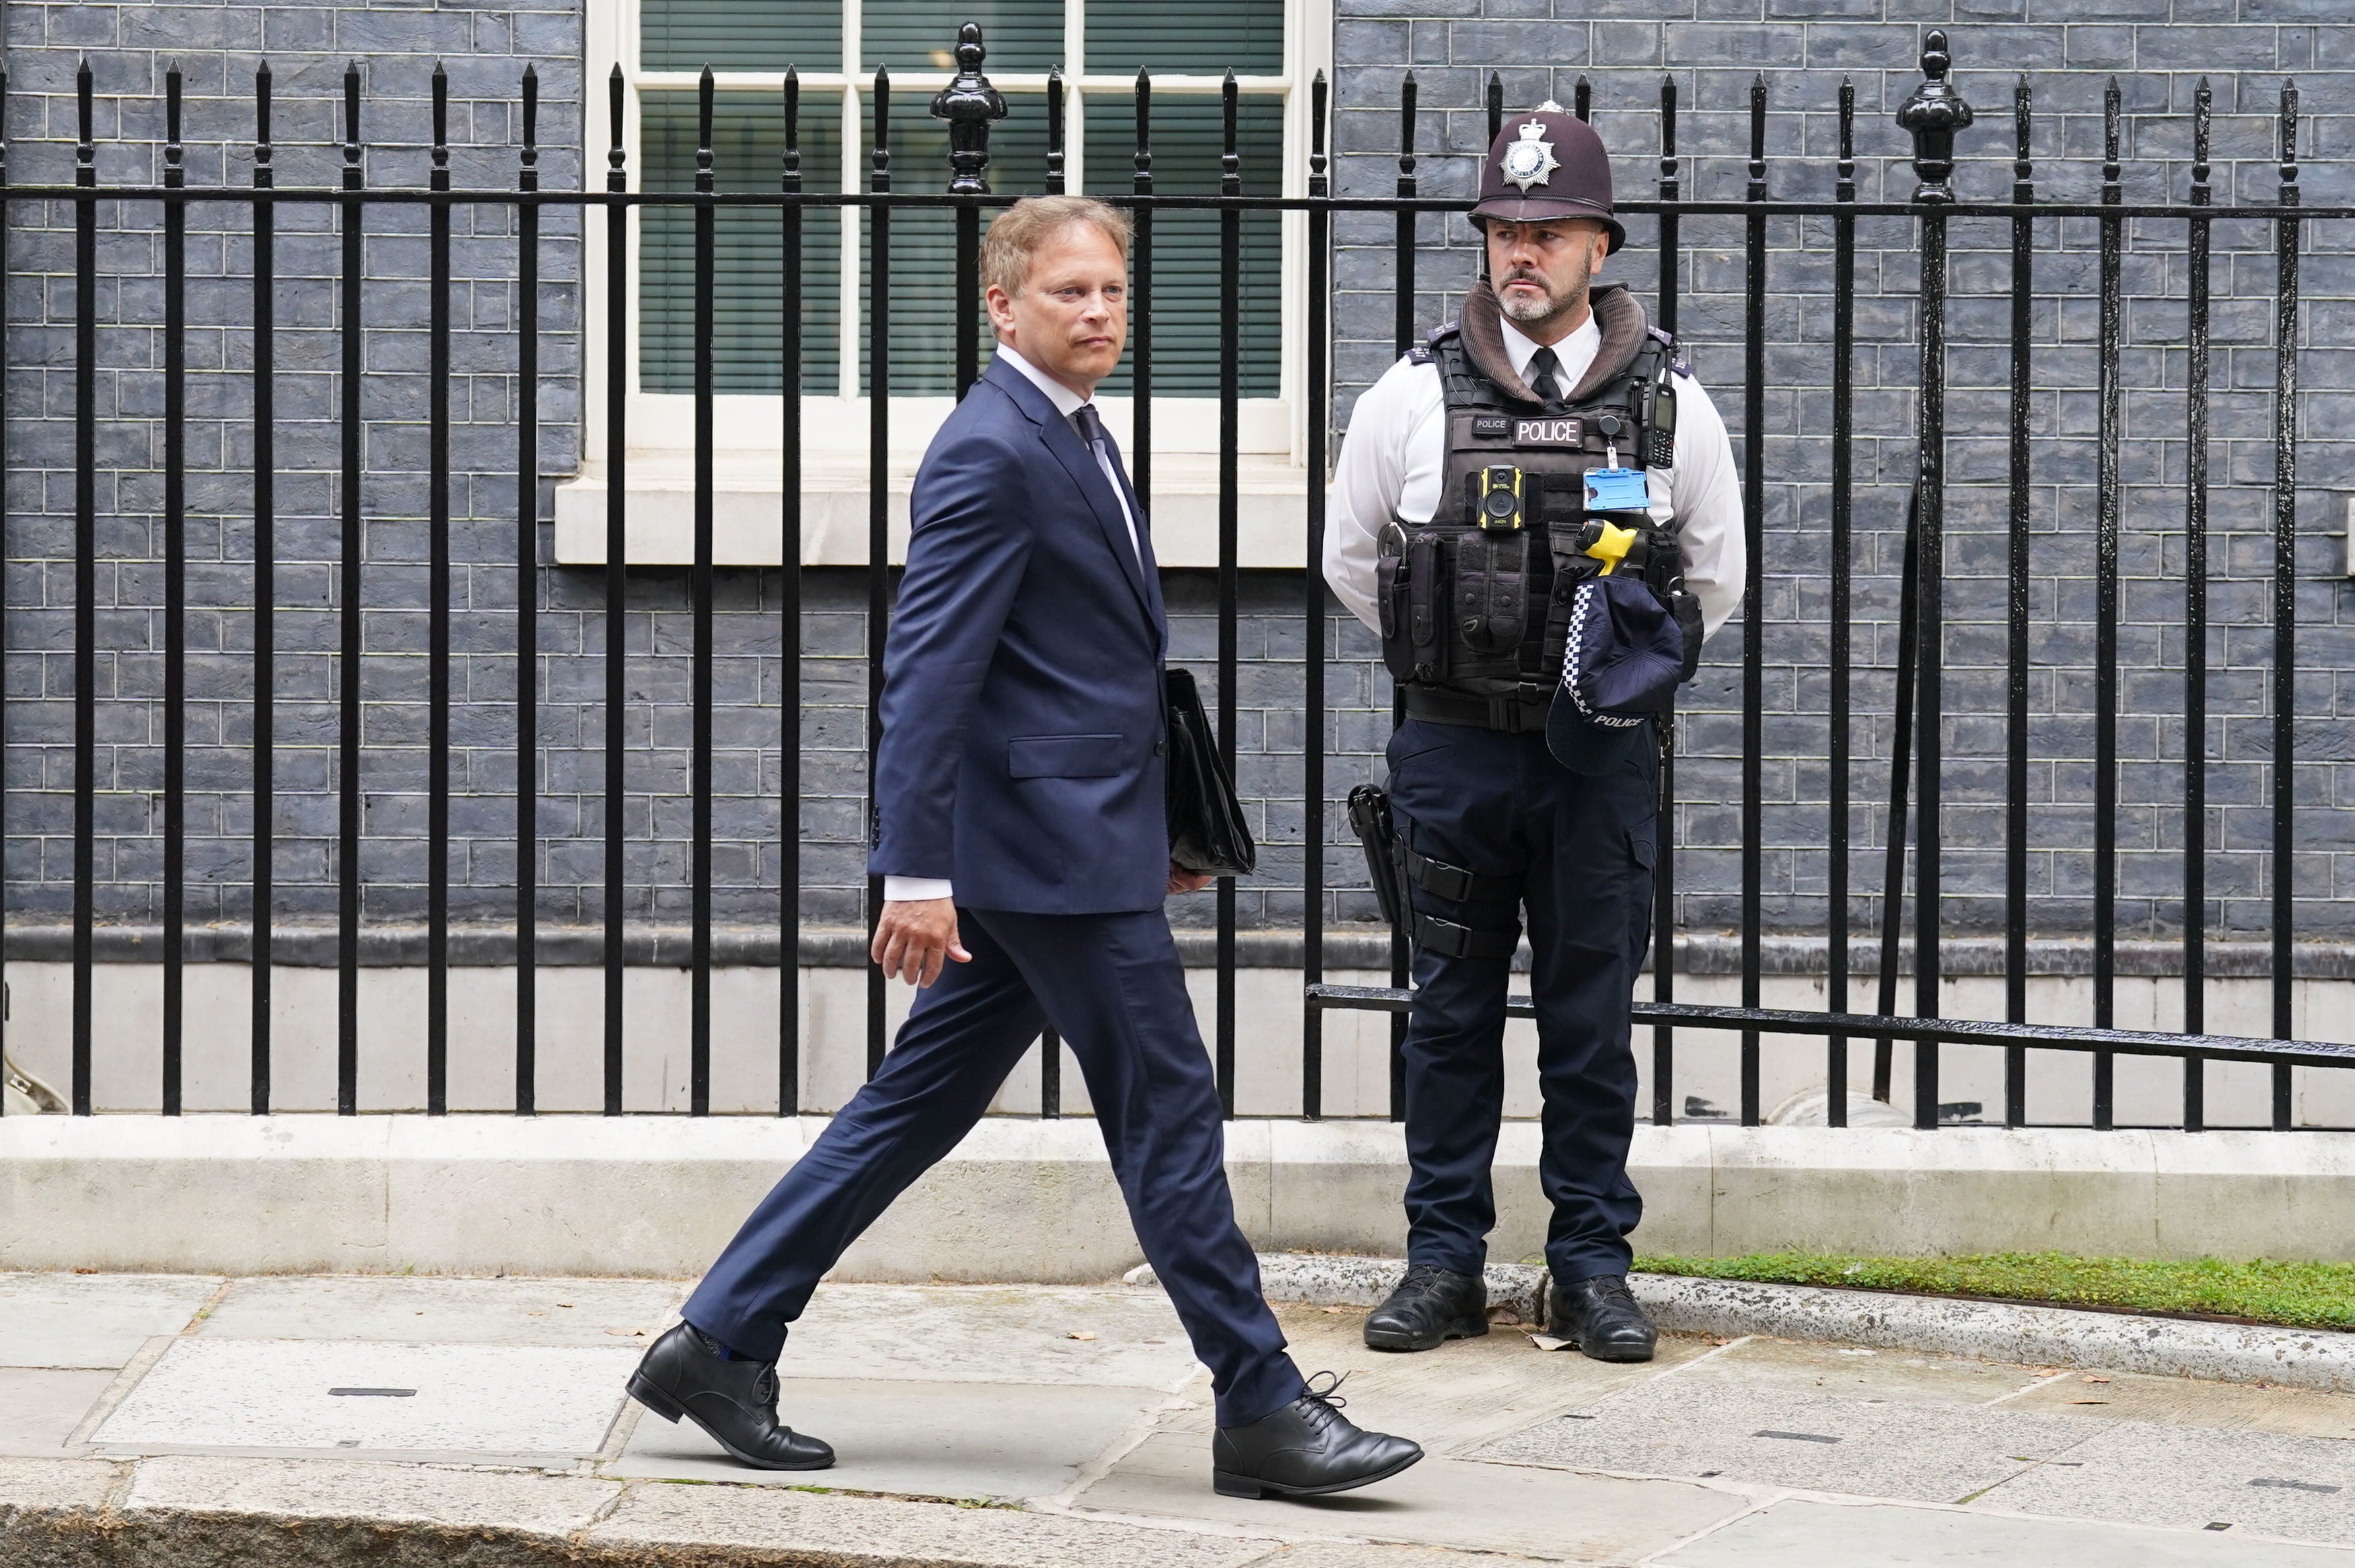 Another new job for Grant Shapps this week